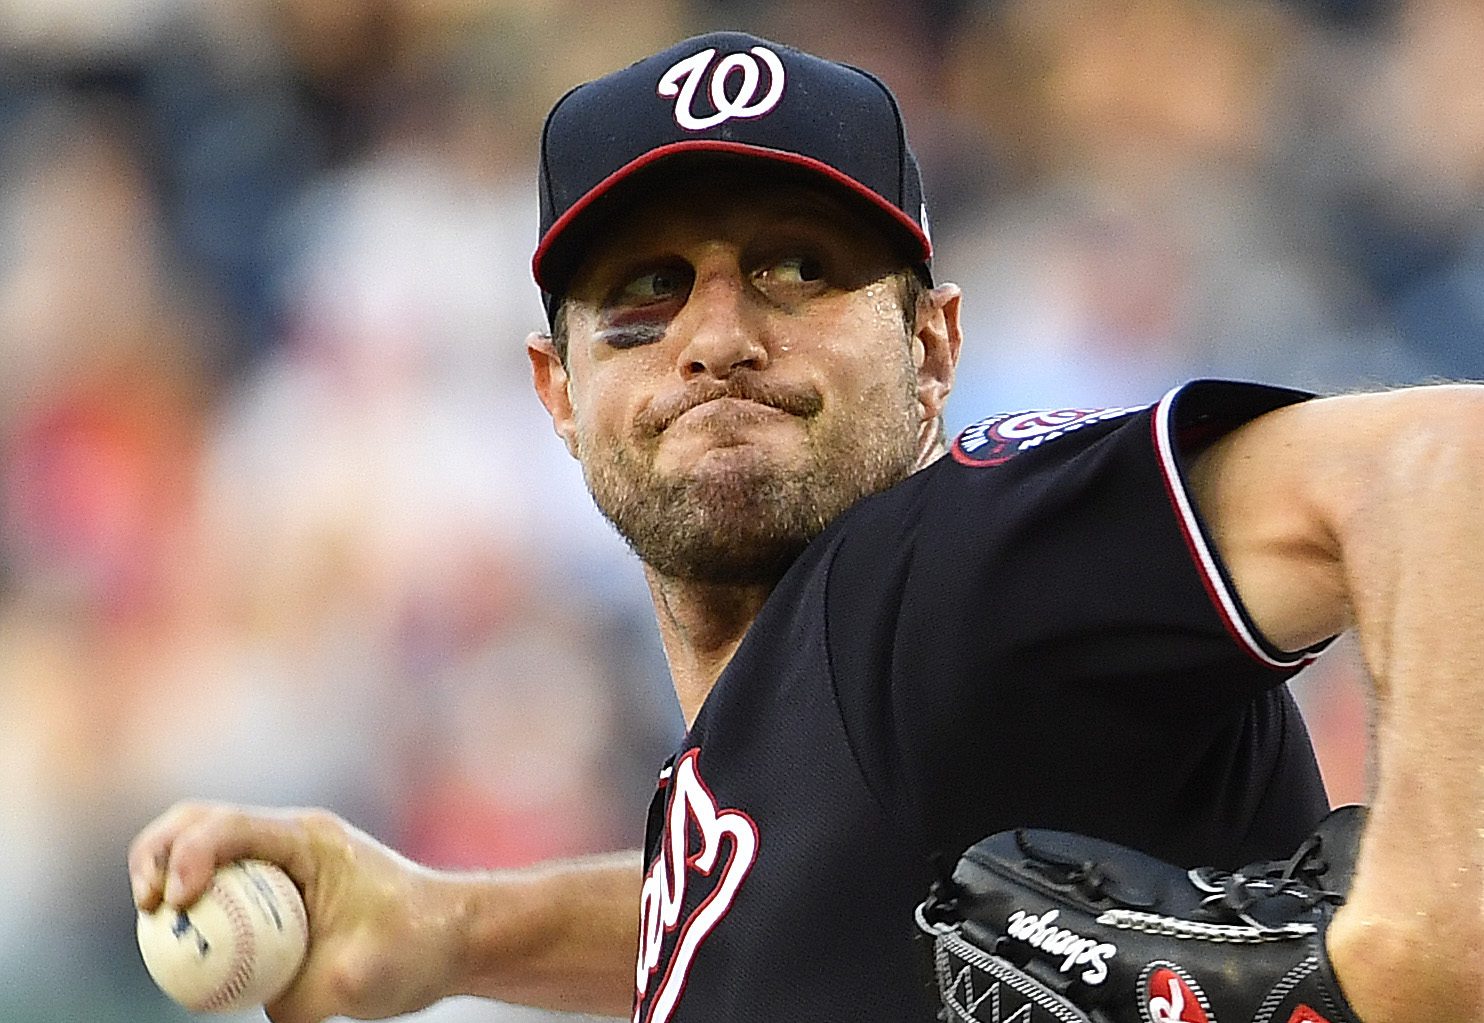 Max Scherzer 'loses' $100K on Cy Young recount